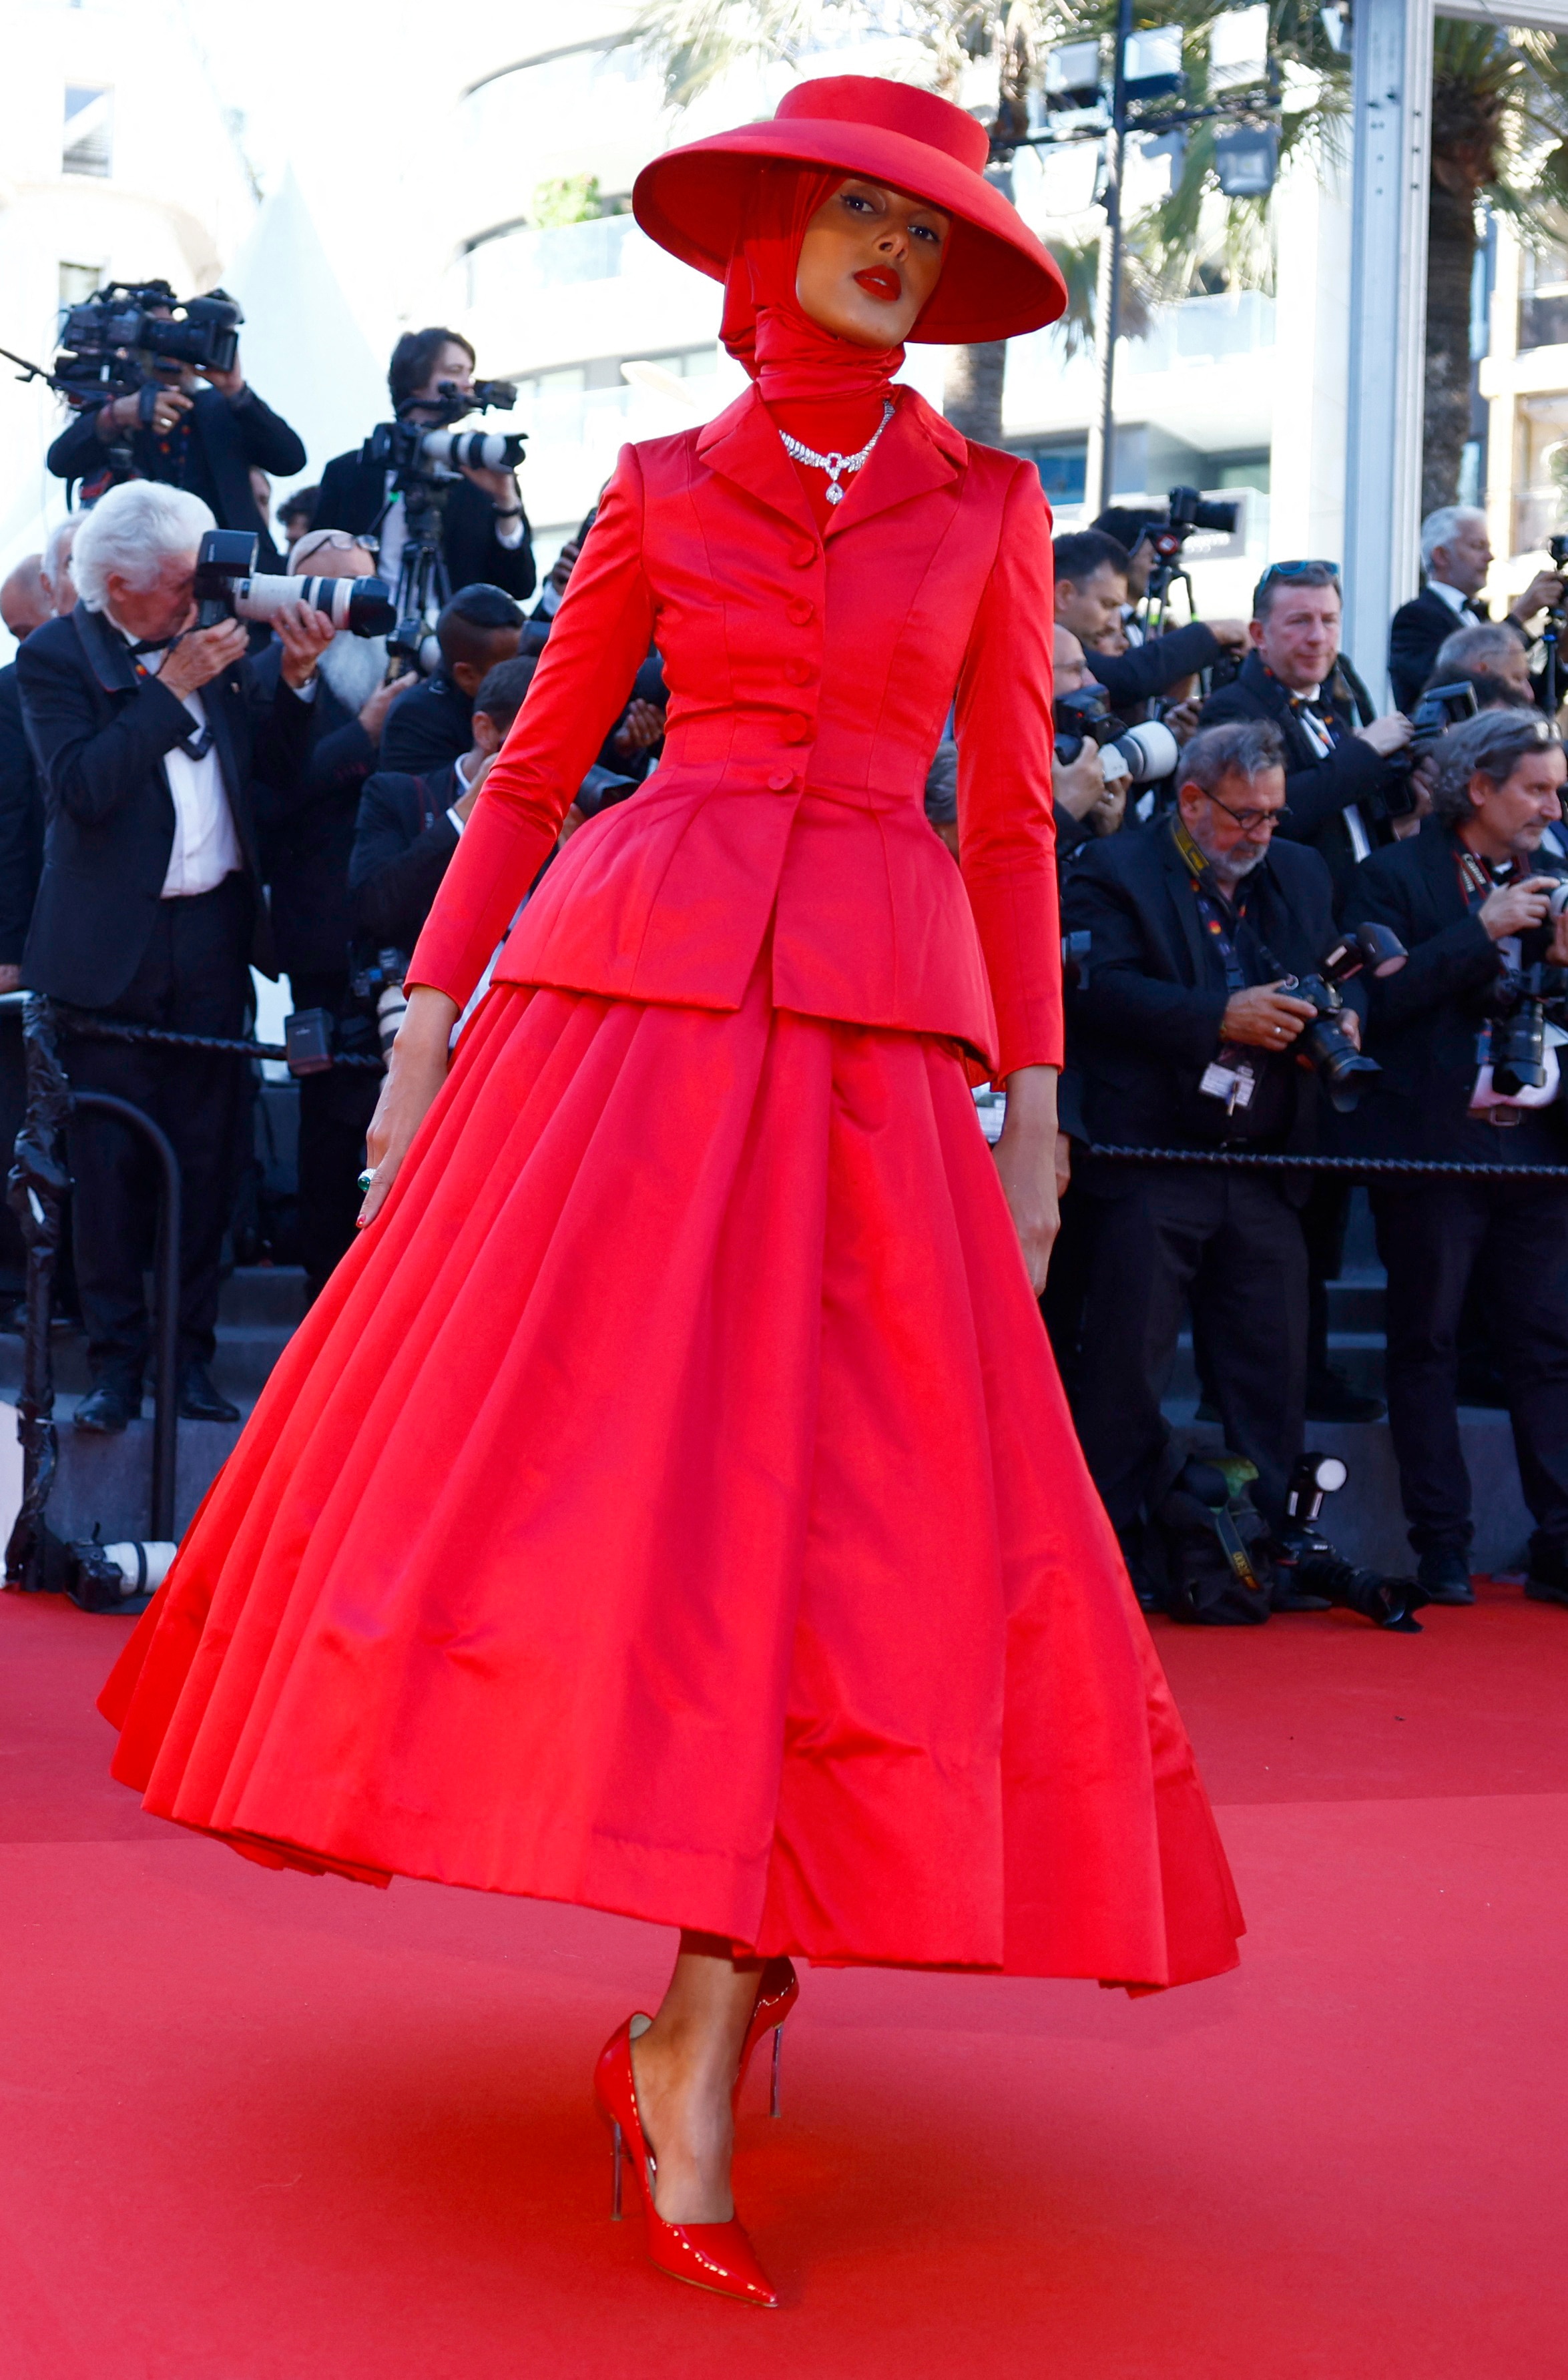 Rawdah Mohamed wearing a bright red A-line skirt, blazer, headscarf and wide-brimmed hat all in the same shade of red